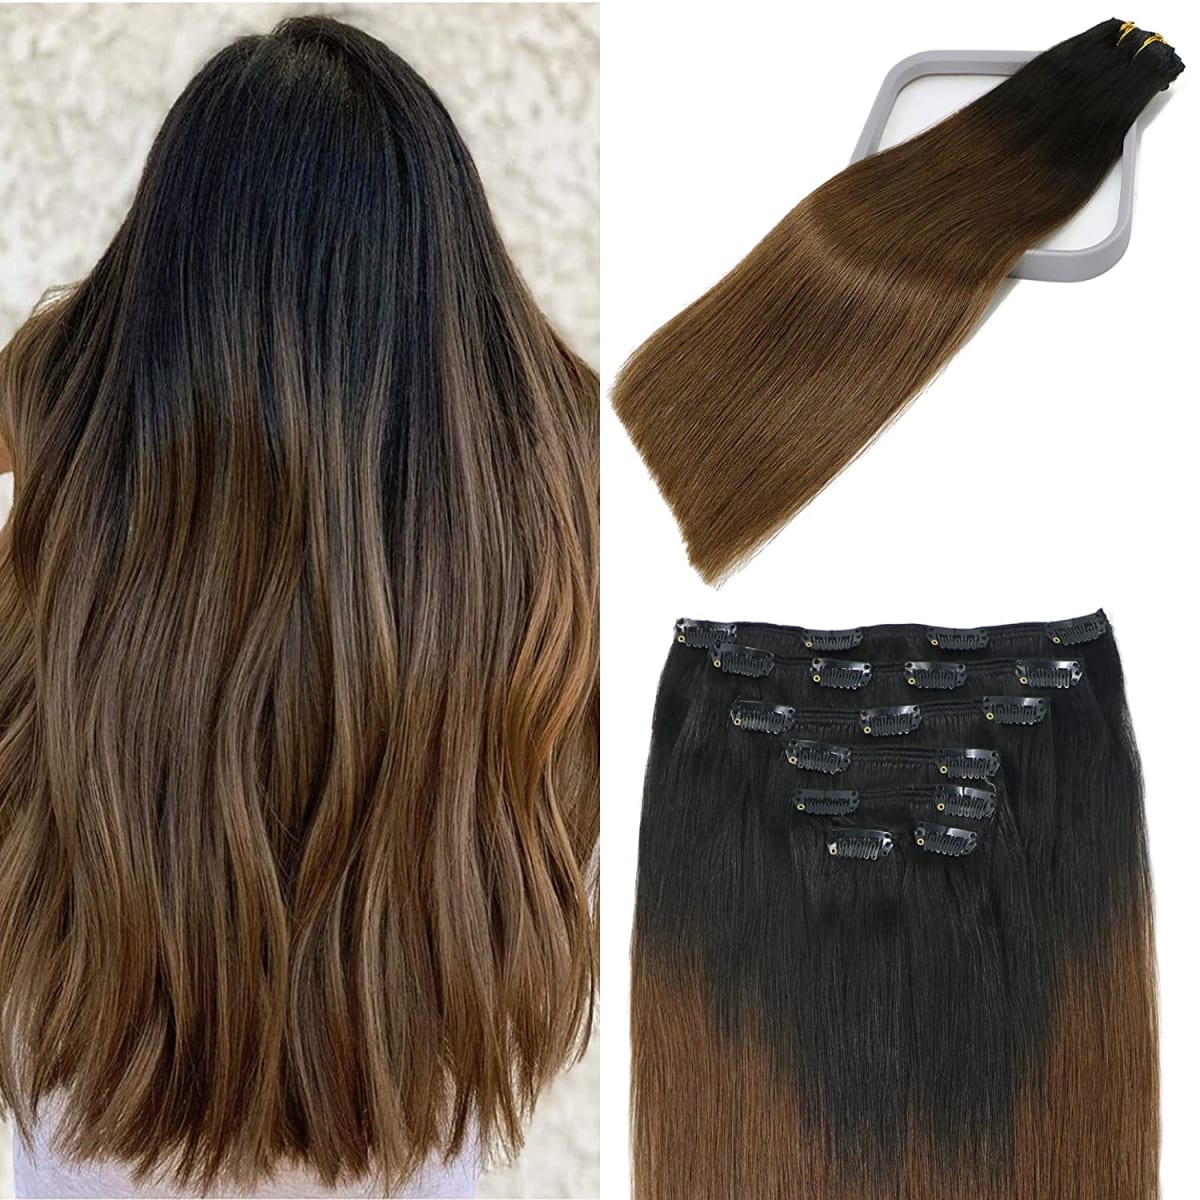 Clip in Hair Extensions Human Hair Balayage Ombre Golden Brown Mixed With Platium Blonde Clip In Human Hair Extensions 16Inch Clips Thick Full Head Fine Hair 120 Gram 7PCS